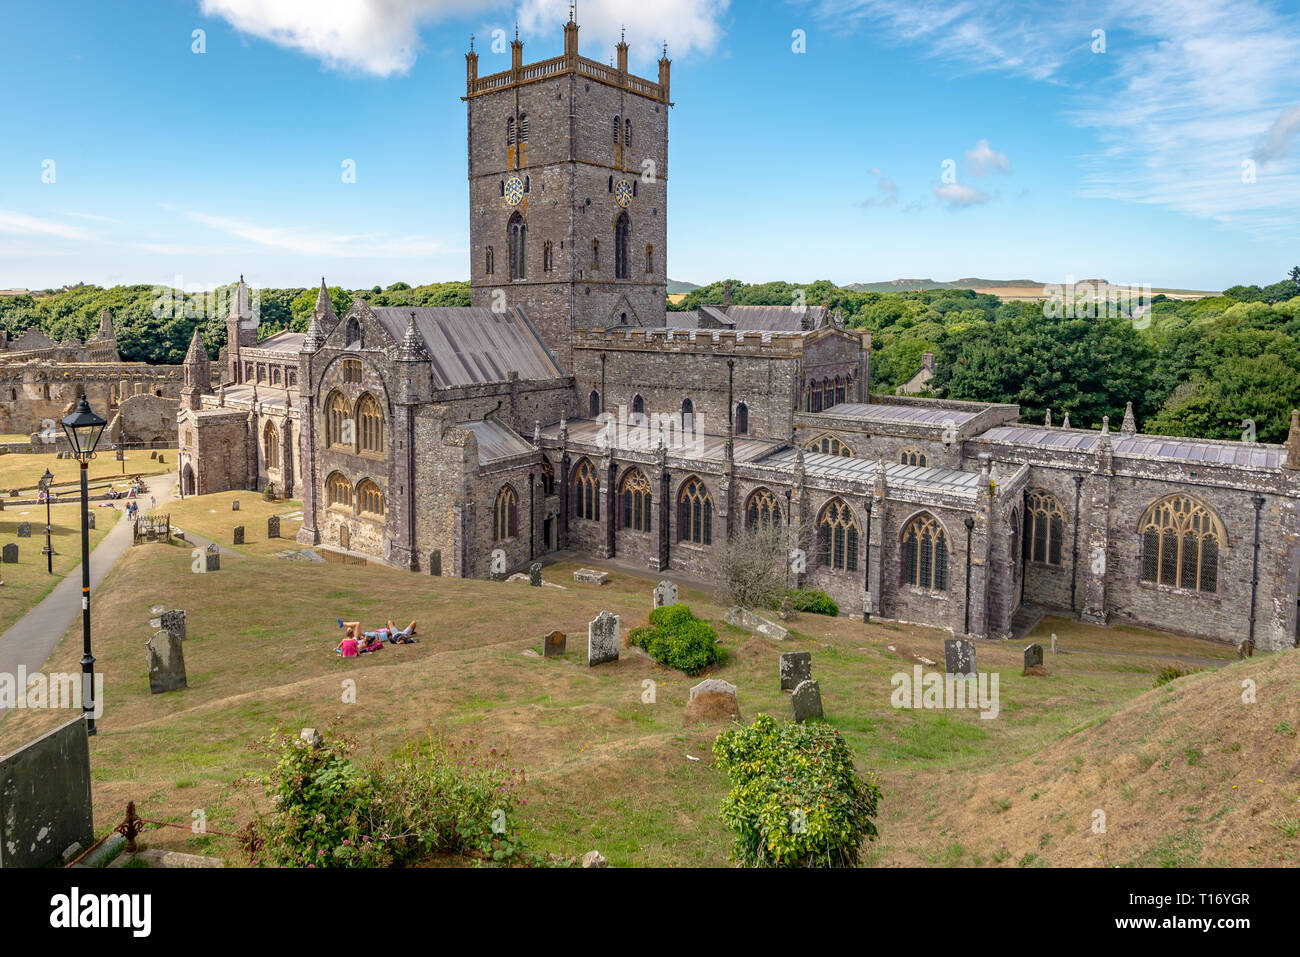 Overview of Saint Davids Cathedral seen from the main entrance, Saint Davids, Wales, United Kingdom Stock Photo